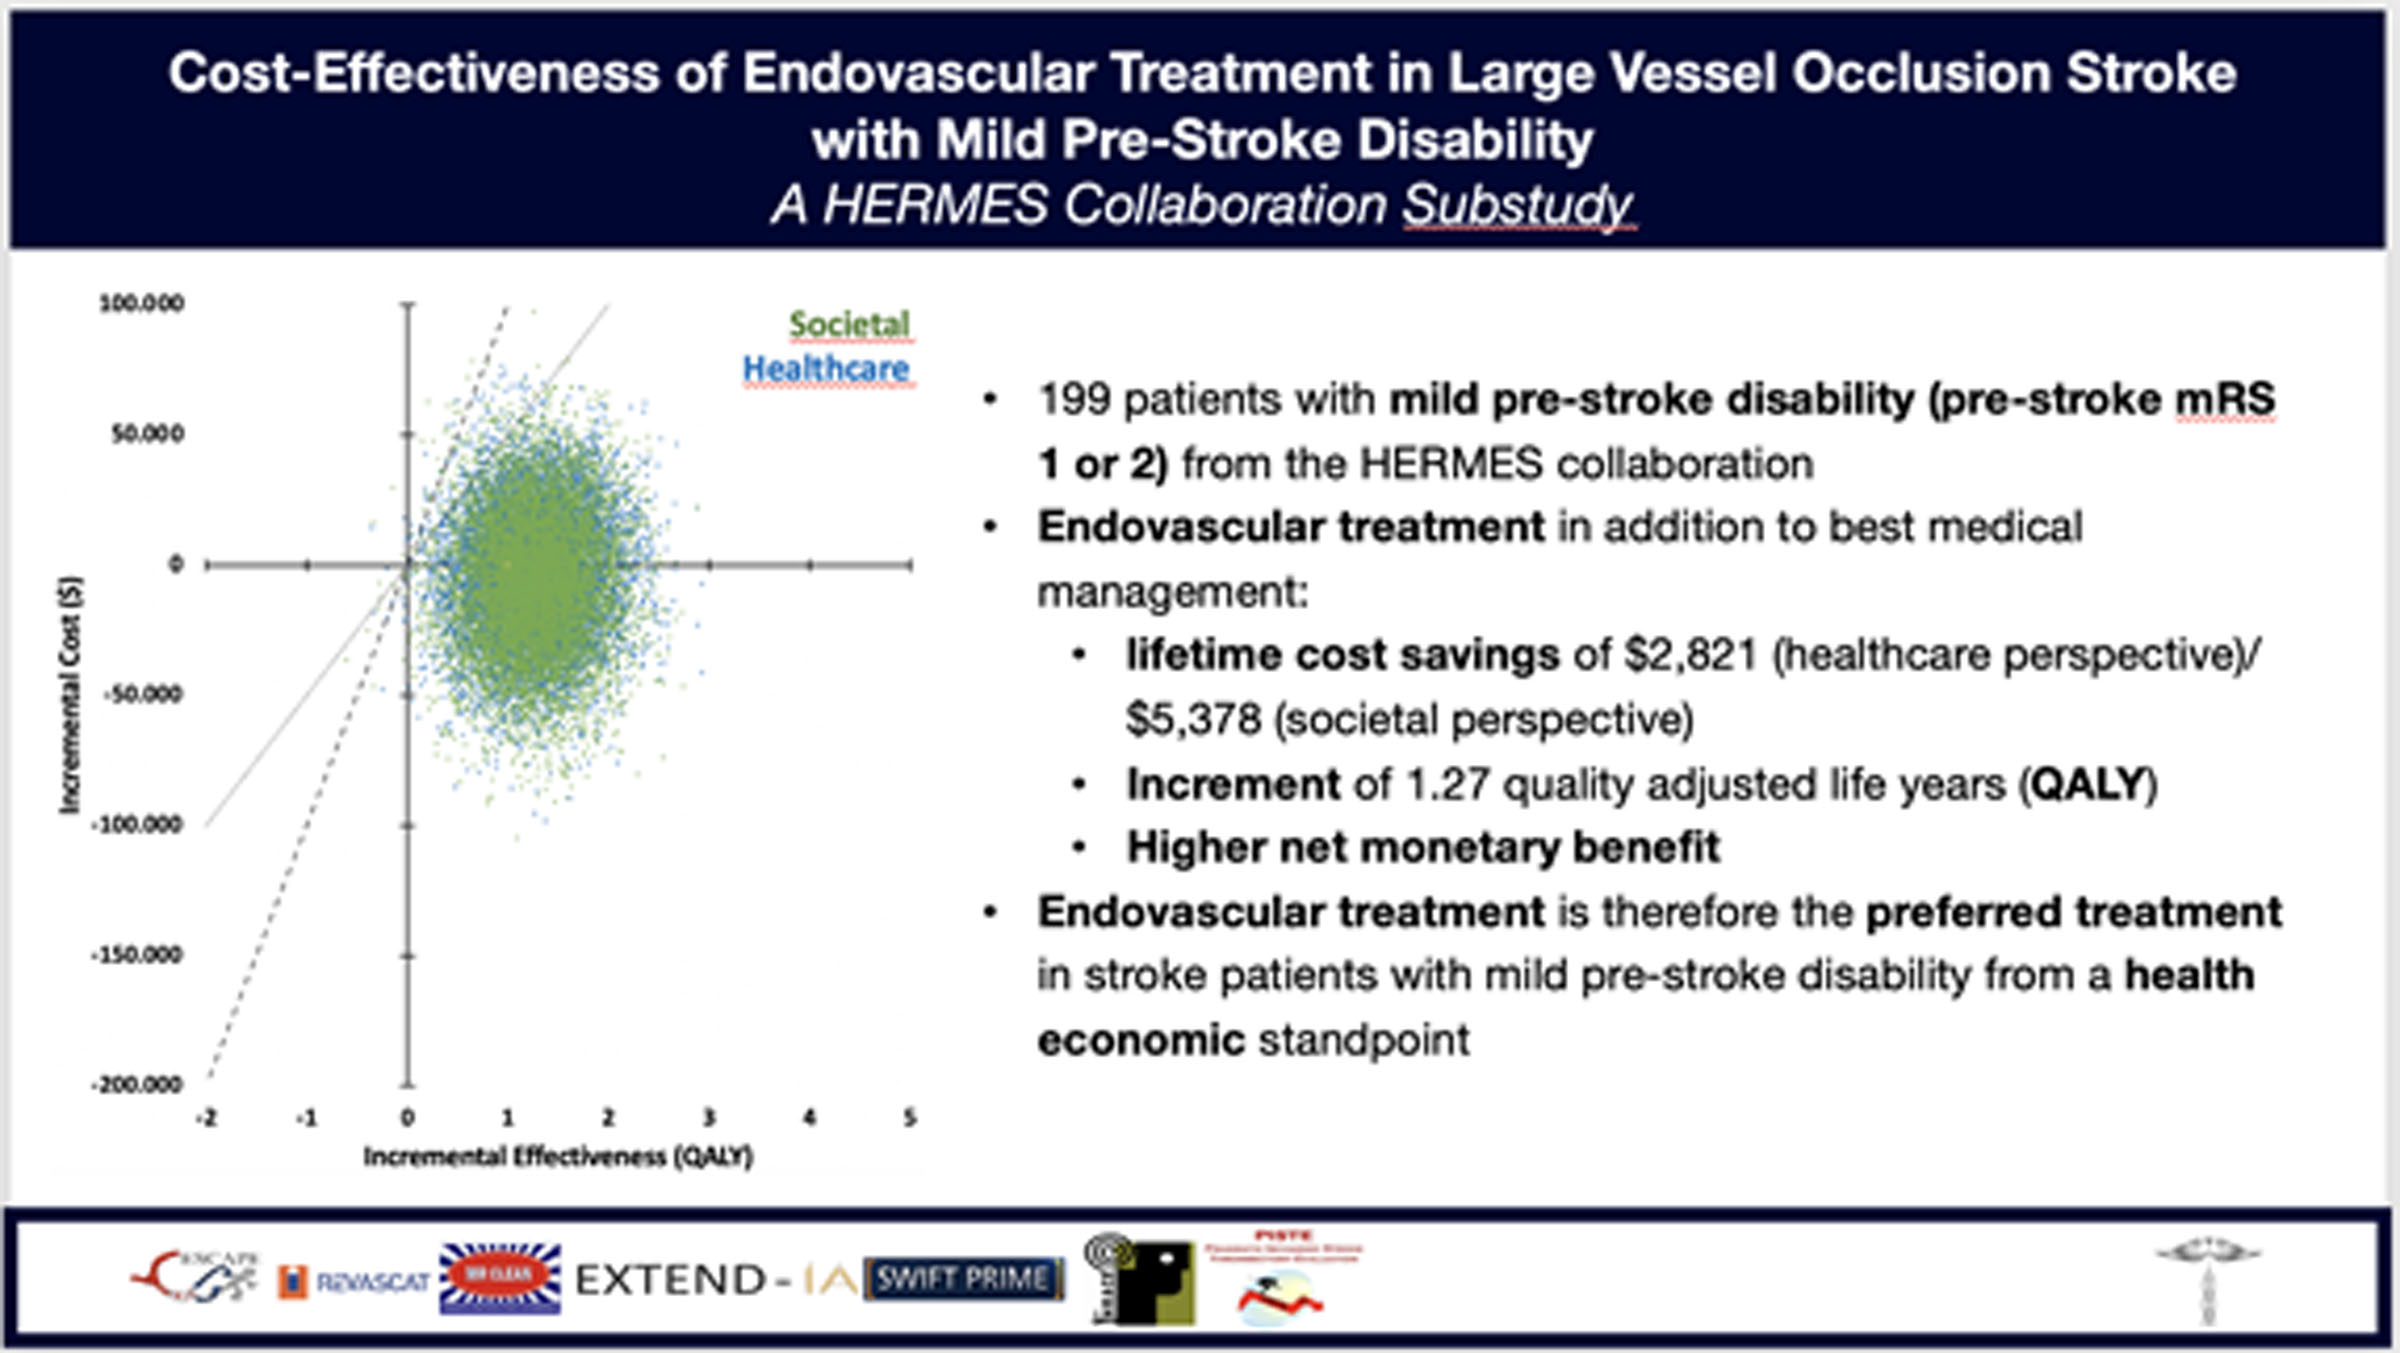 Cost-Effectiveness of Endovascular Treatment in Large Vessel Occlusion Stroke With Mild Prestroke Disability: Results From the HERMES Collaboration